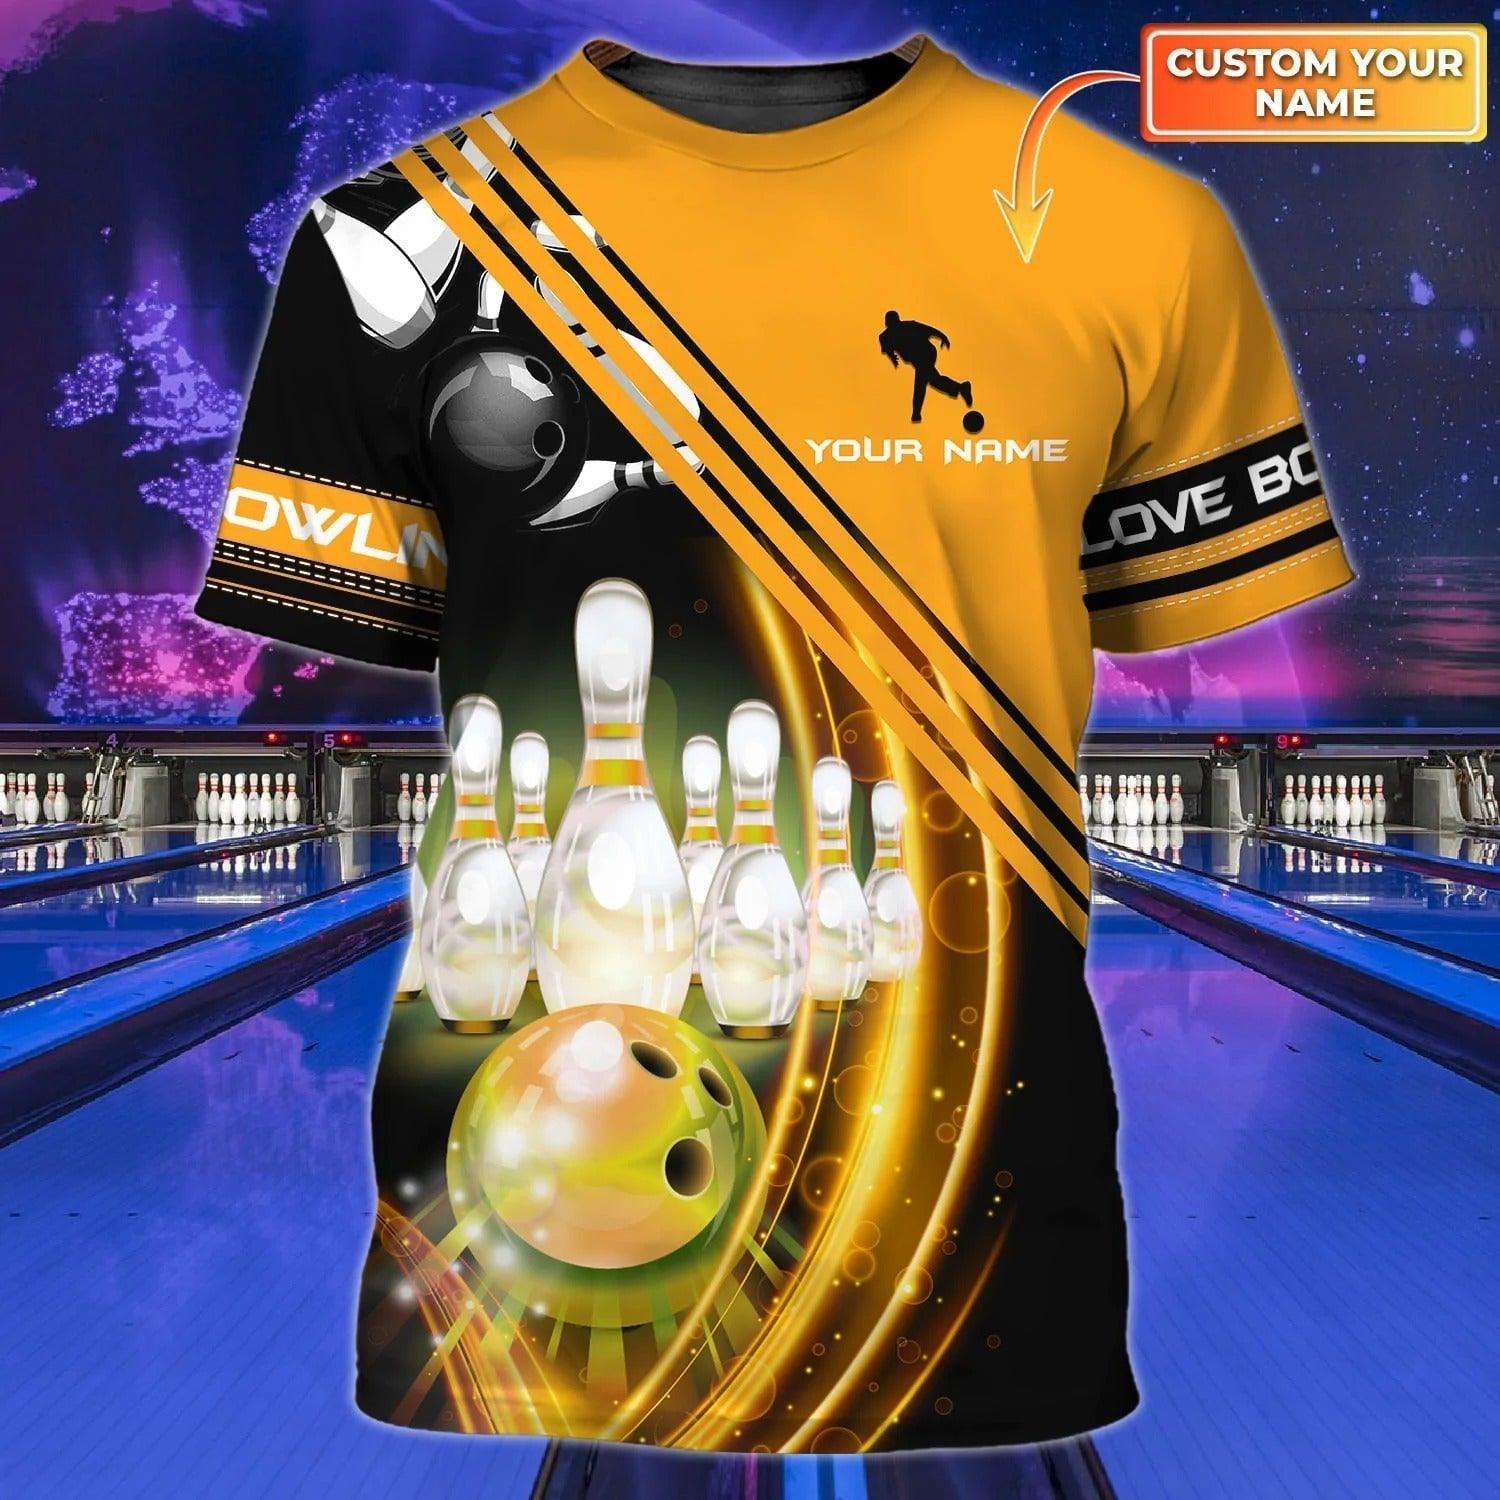 Customized Name Bowling Shirt, Personalized Colorful Bowling Team Uniform Gift To Bowling Player - Best Gift For Men, Bowling Lovers - Amzanimalsgift